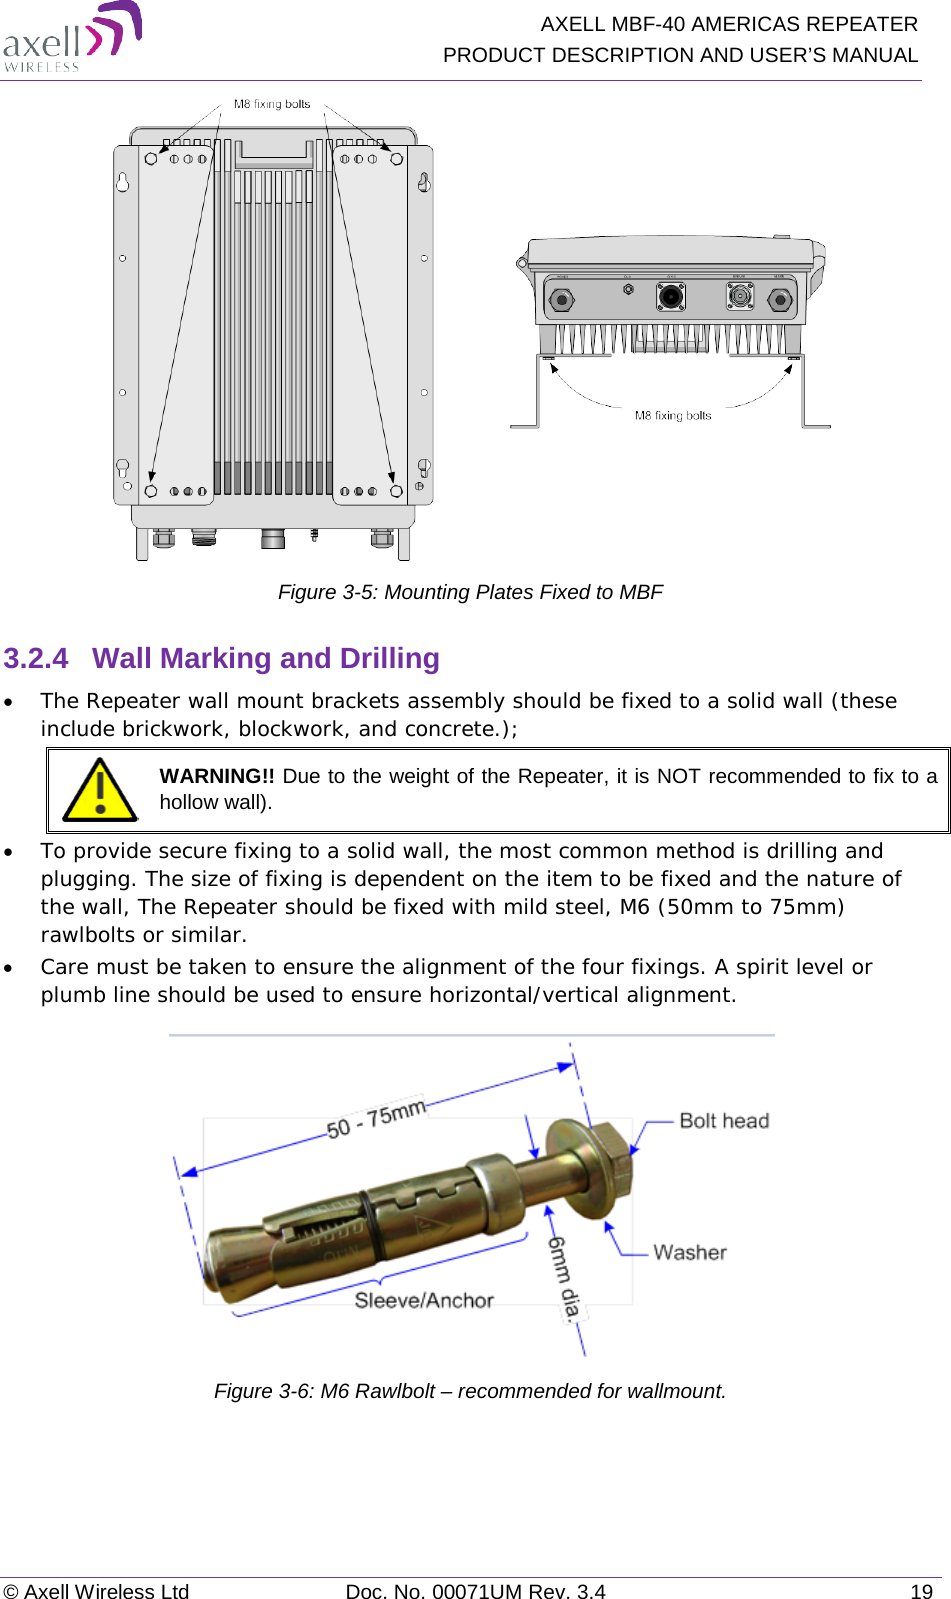   AXELL MBF-40 AMERICAS REPEATER PRODUCT DESCRIPTION AND USER’S MANUAL © Axell Wireless Ltd Doc. No. 00071UM Rev. 3.4 19  Figure  3-5: Mounting Plates Fixed to MBF 3.2.4  Wall Marking and Drilling • The Repeater wall mount brackets assembly should be fixed to a solid wall (these include brickwork, blockwork, and concrete.);   WARNING!! Due to the weight of the Repeater, it is NOT recommended to fix to a hollow wall). • To provide secure fixing to a solid wall, the most common method is drilling and plugging. The size of fixing is dependent on the item to be fixed and the nature of the wall, The Repeater should be fixed with mild steel, M6 (50mm to 75mm) rawlbolts or similar. • Care must be taken to ensure the alignment of the four fixings. A spirit level or plumb line should be used to ensure horizontal/vertical alignment.  Figure  3-6: M6 Rawlbolt – recommended for wallmount.   